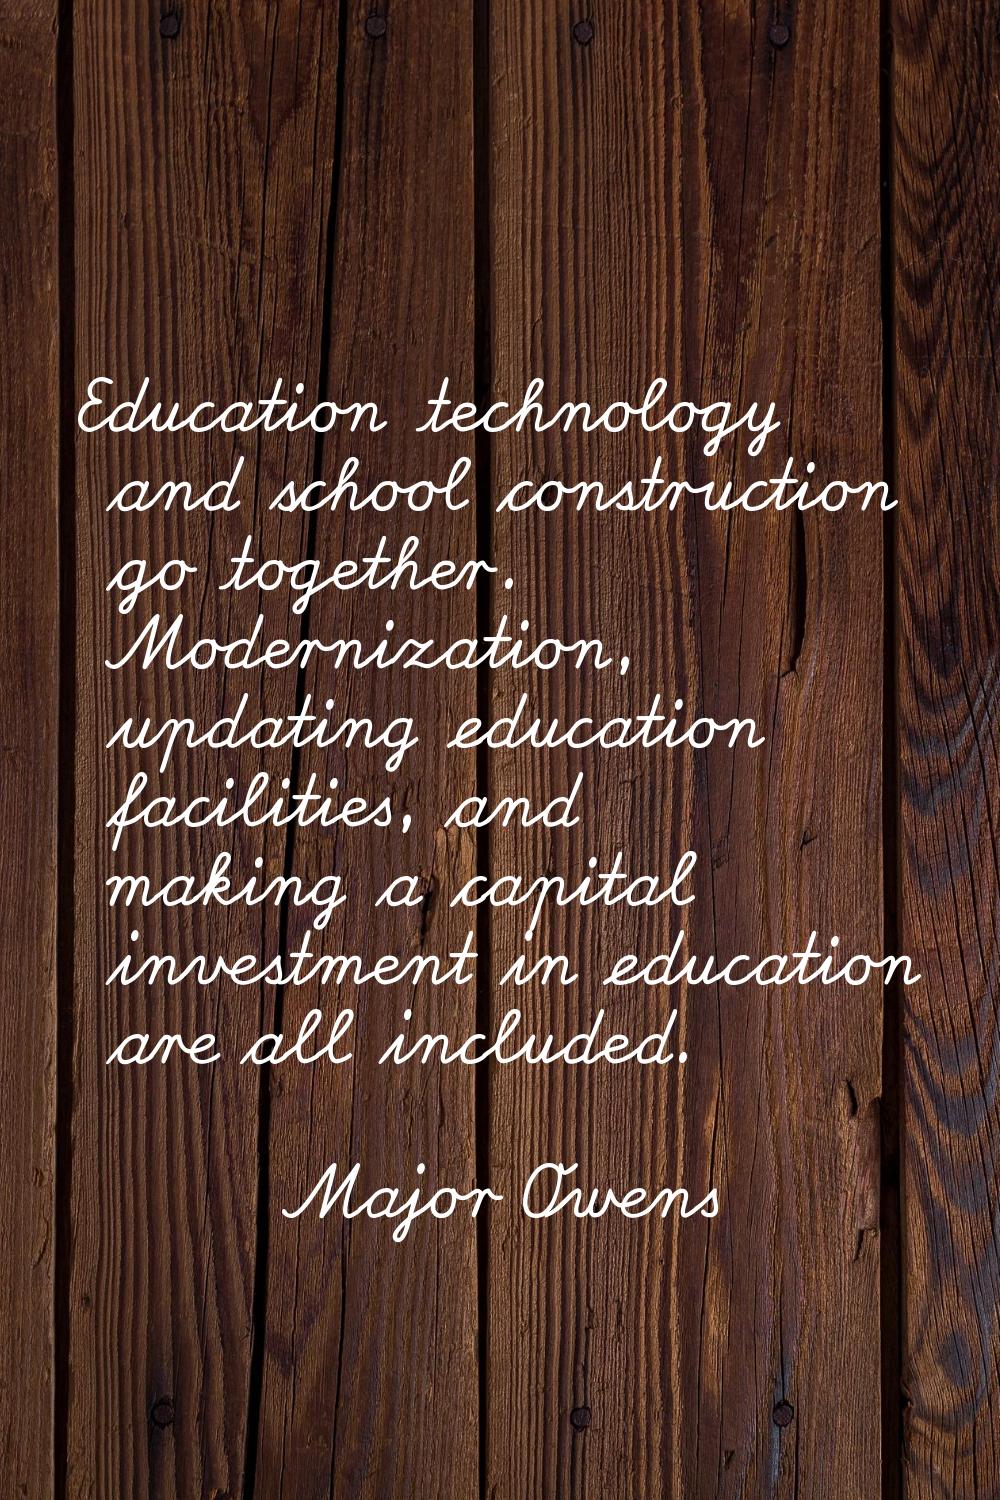 Education technology and school construction go together. Modernization, updating education facilit